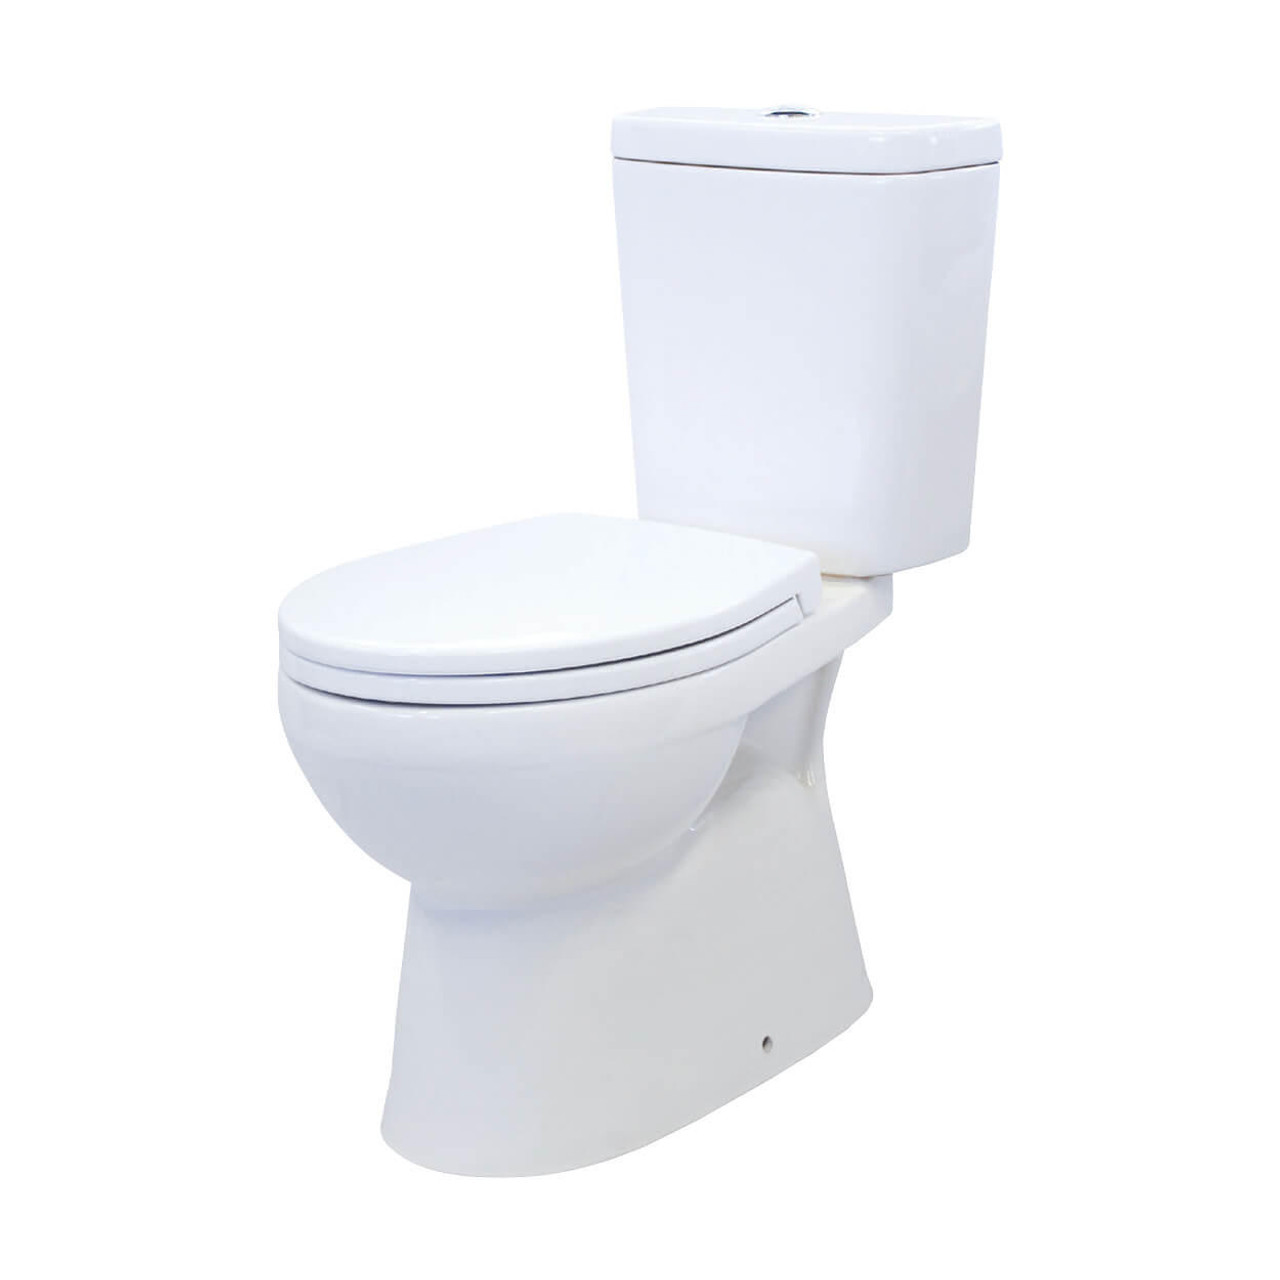  Harmony Nardini Close-Coupled Toilet Suite with Soft-Close Seat 